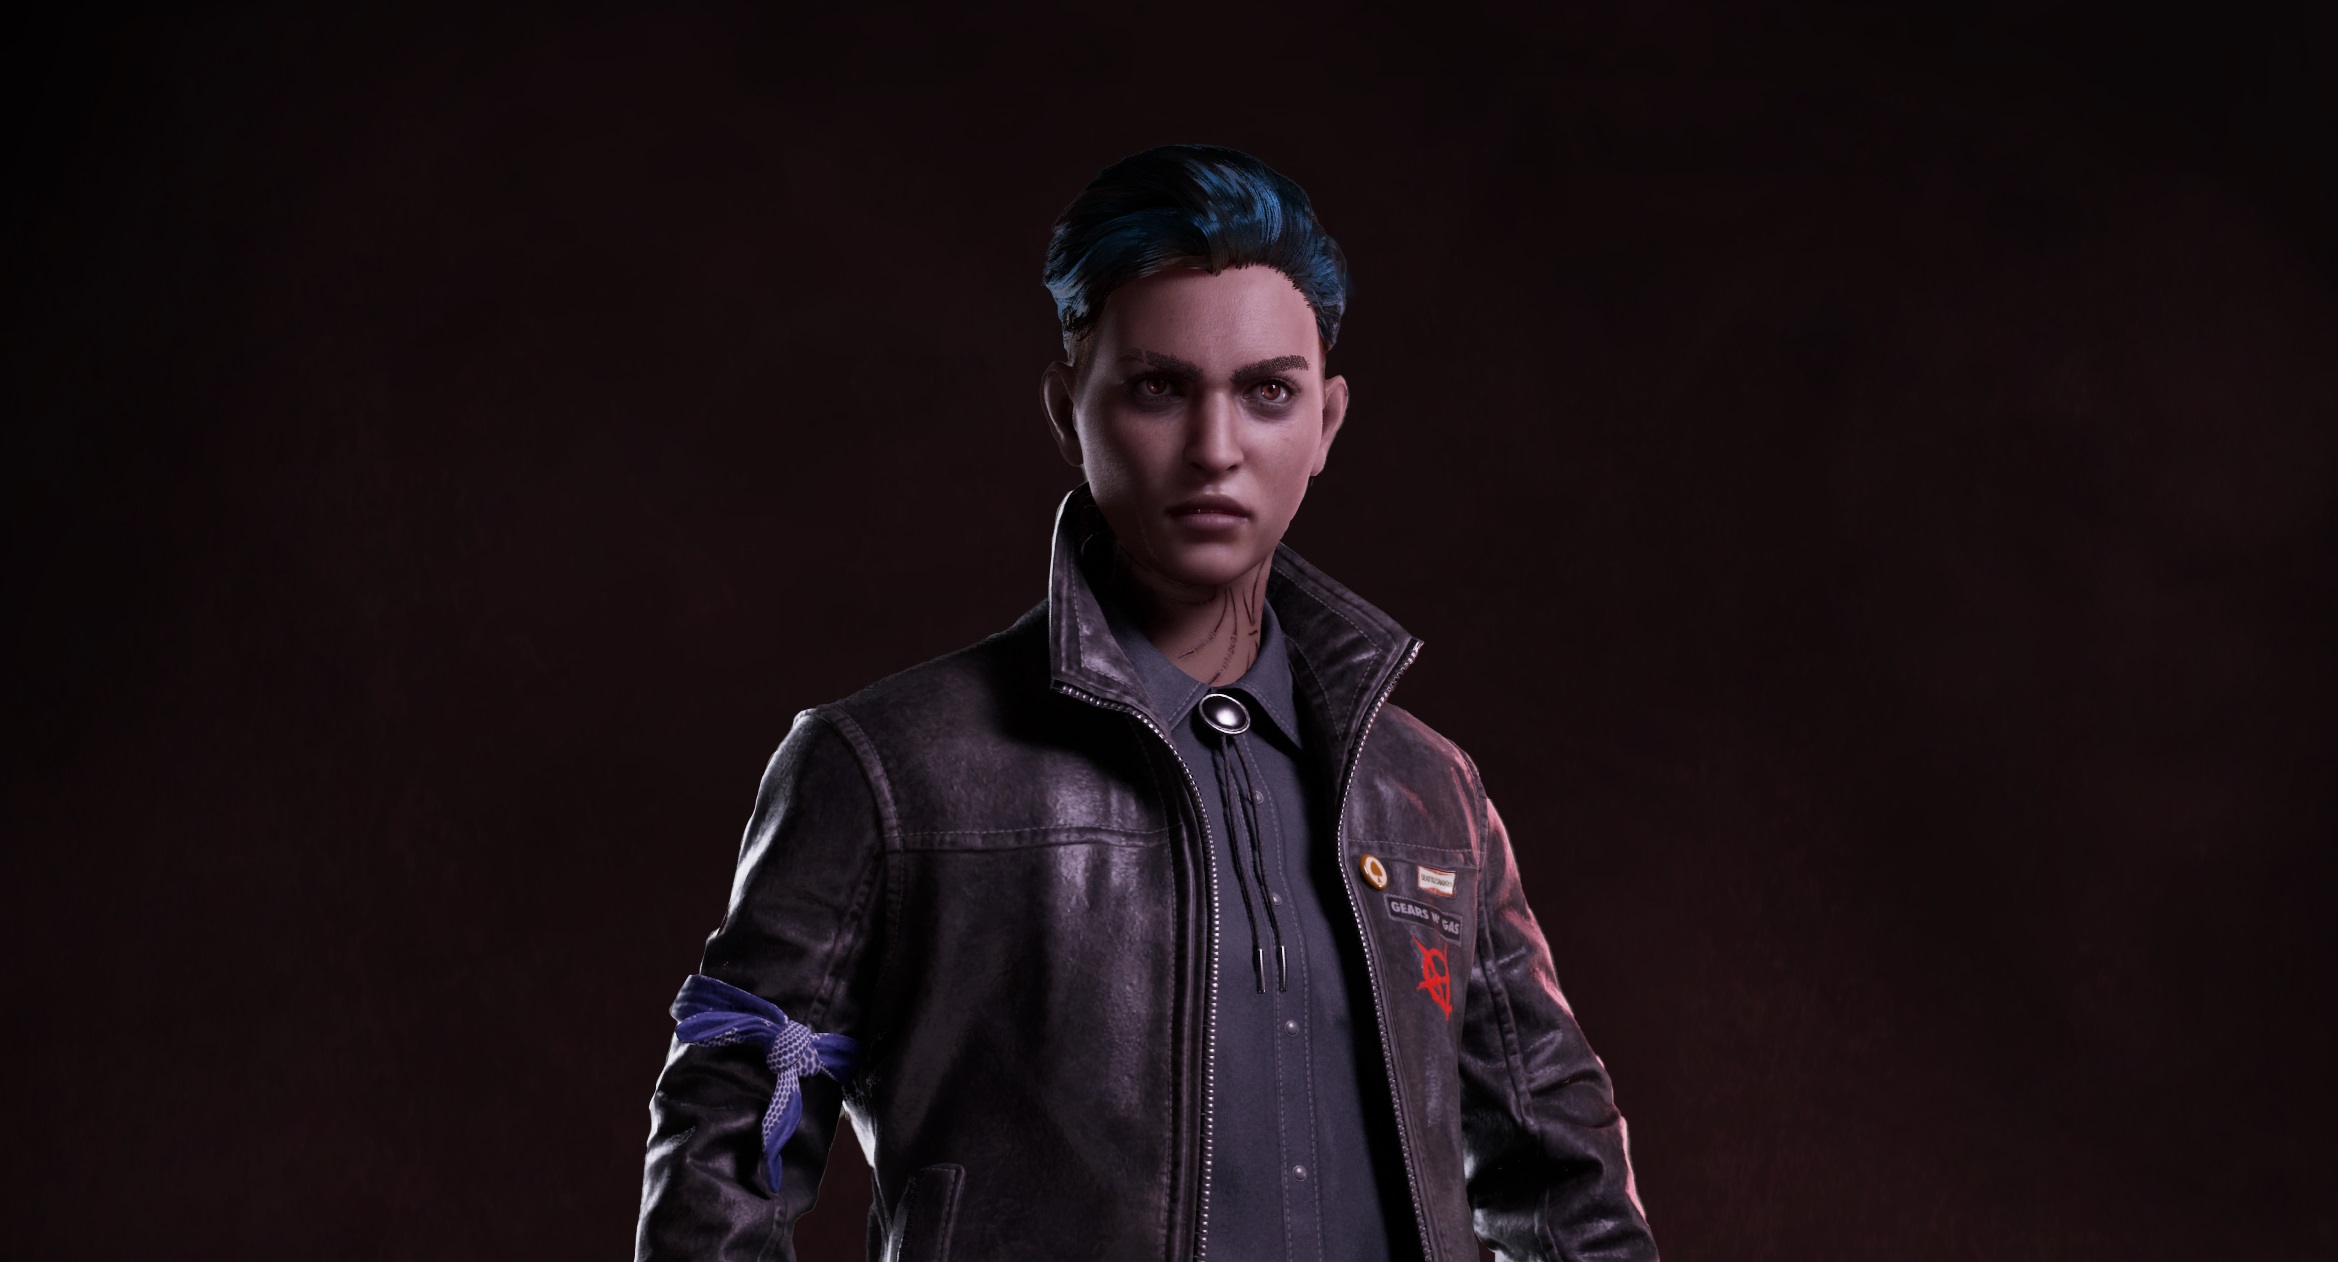 Vampire: The Masquerade – Bloodlines 2 reveals its first clan, the Brujah, four years after it revealed its first clan, the Brujah